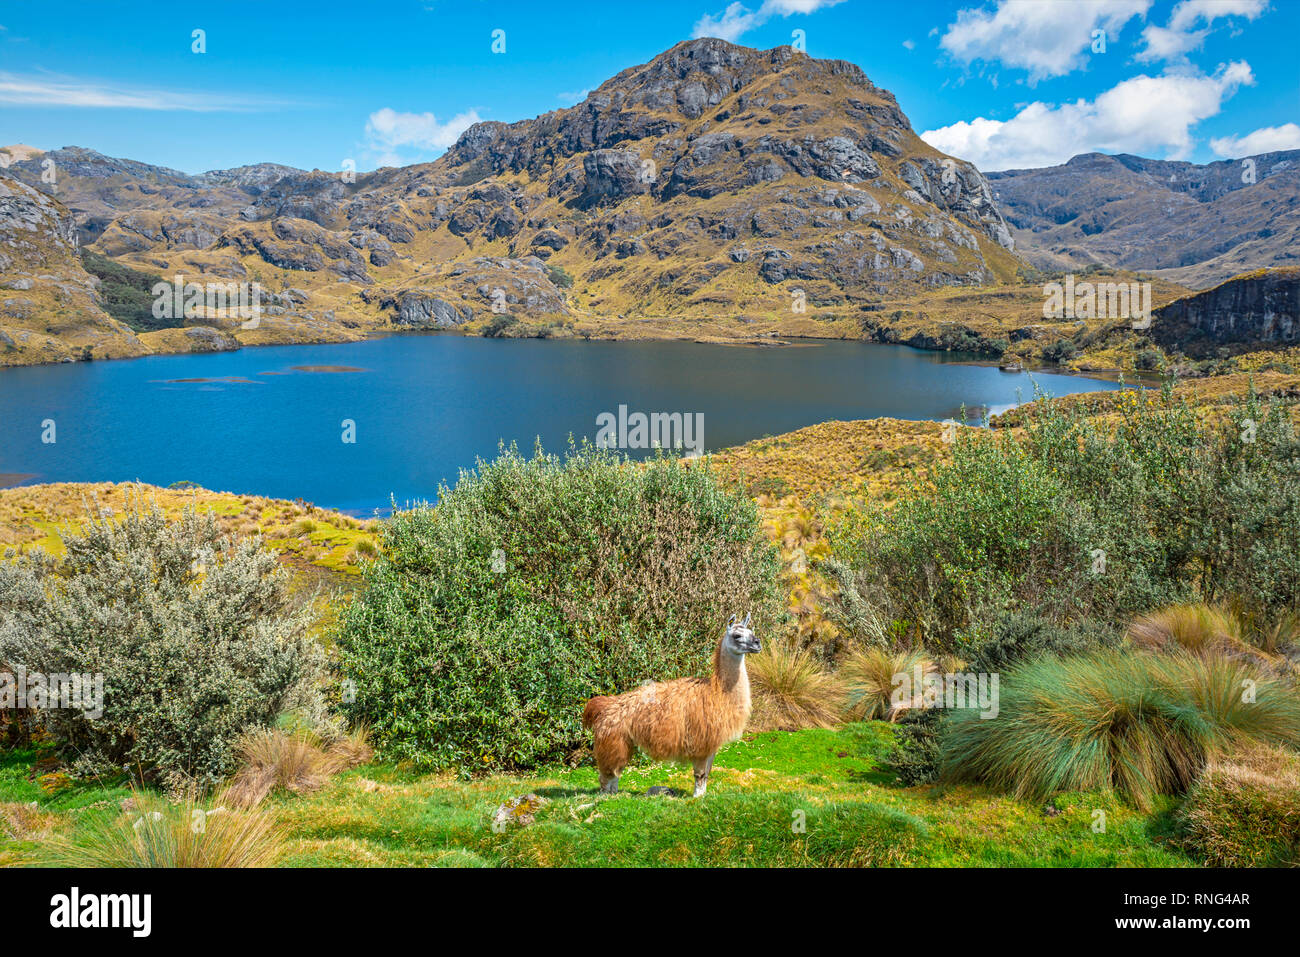 A llama in the wild with a lovely blue coloured lagoon inside Cajas national park on a hiking pole near the city of Cuenca, Ecuador. Stock Photo